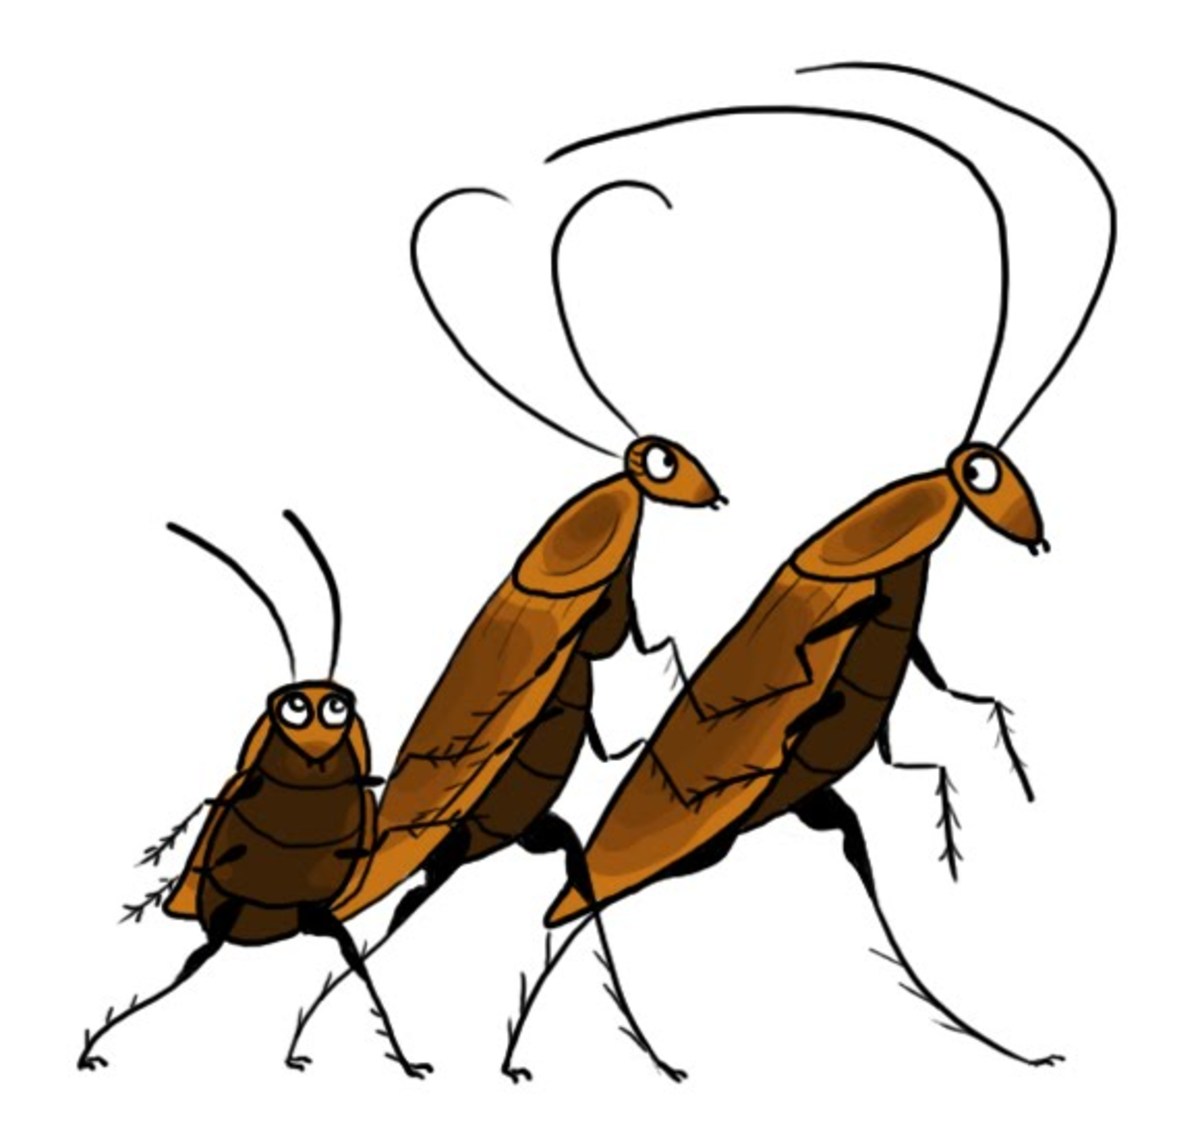 Cockroaches crawl mostly at night. They love dirty, dark corners of the home.